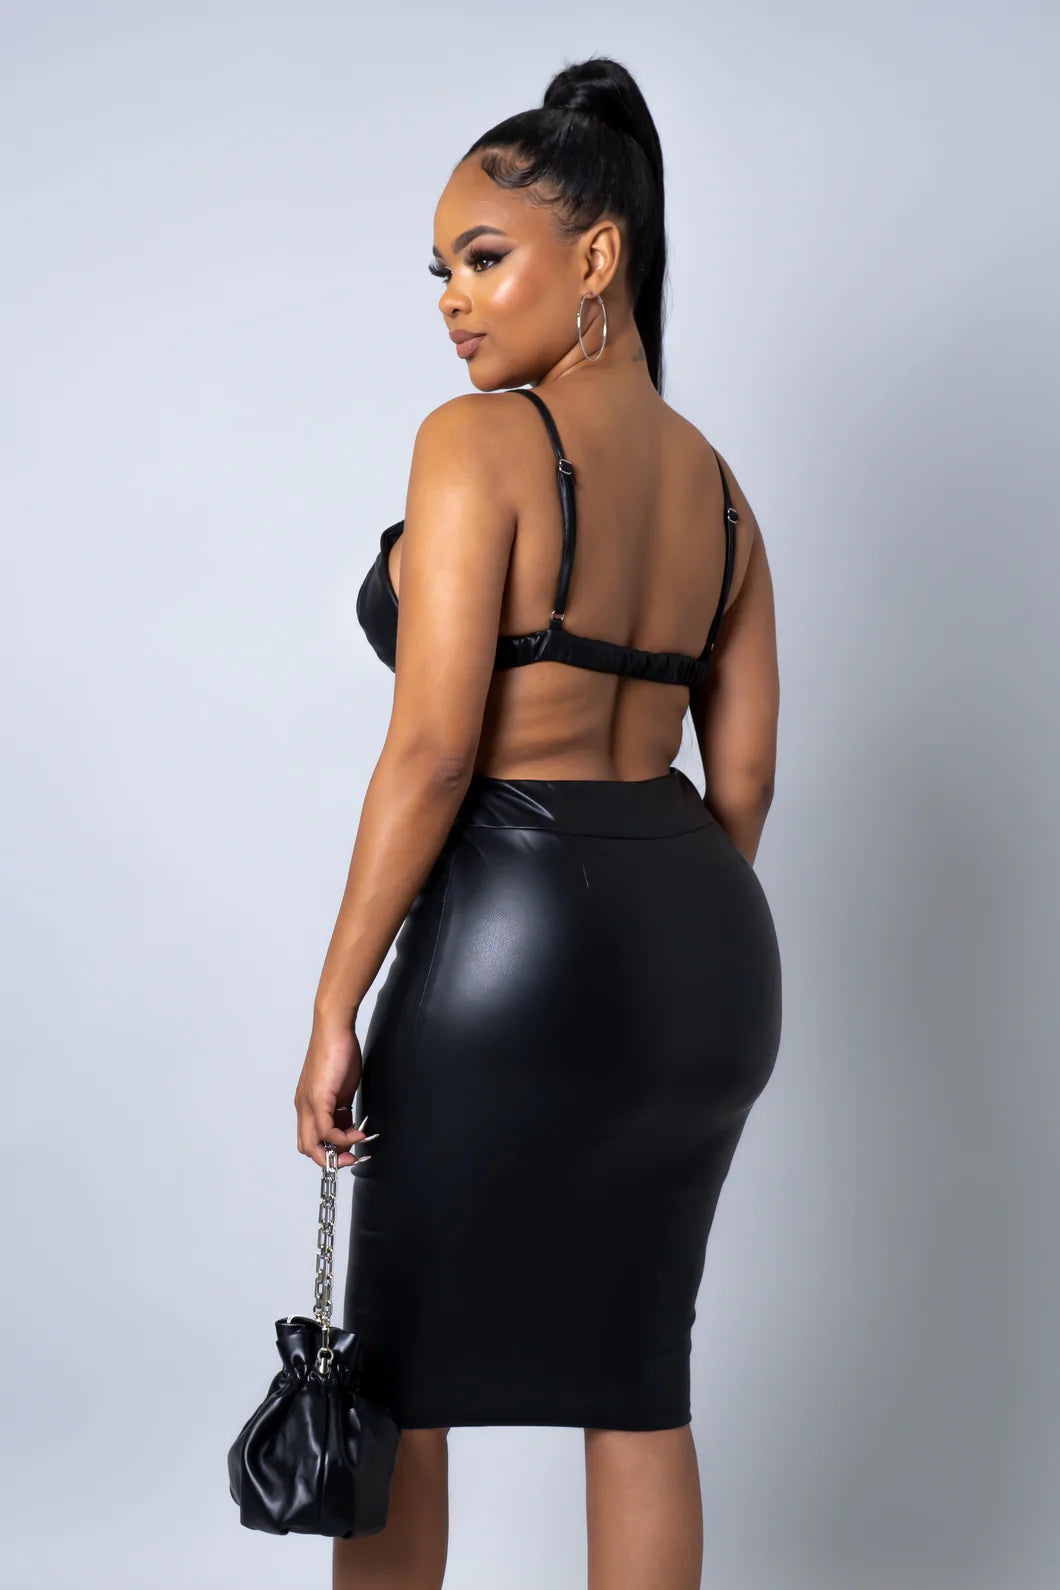 The Headliner Vegan Leather Midi Skirt Set (BLACK )SimplyDerri
Keep it cute and classy with Our Headliner Vegan Leather Midi Skirt Set. Featuring a midi skirt and matching crop top made of soft vegan leather fabric; this outfitOutfit SetsHeadliner Vegan Leather Midi Skirt Set (BLACK )